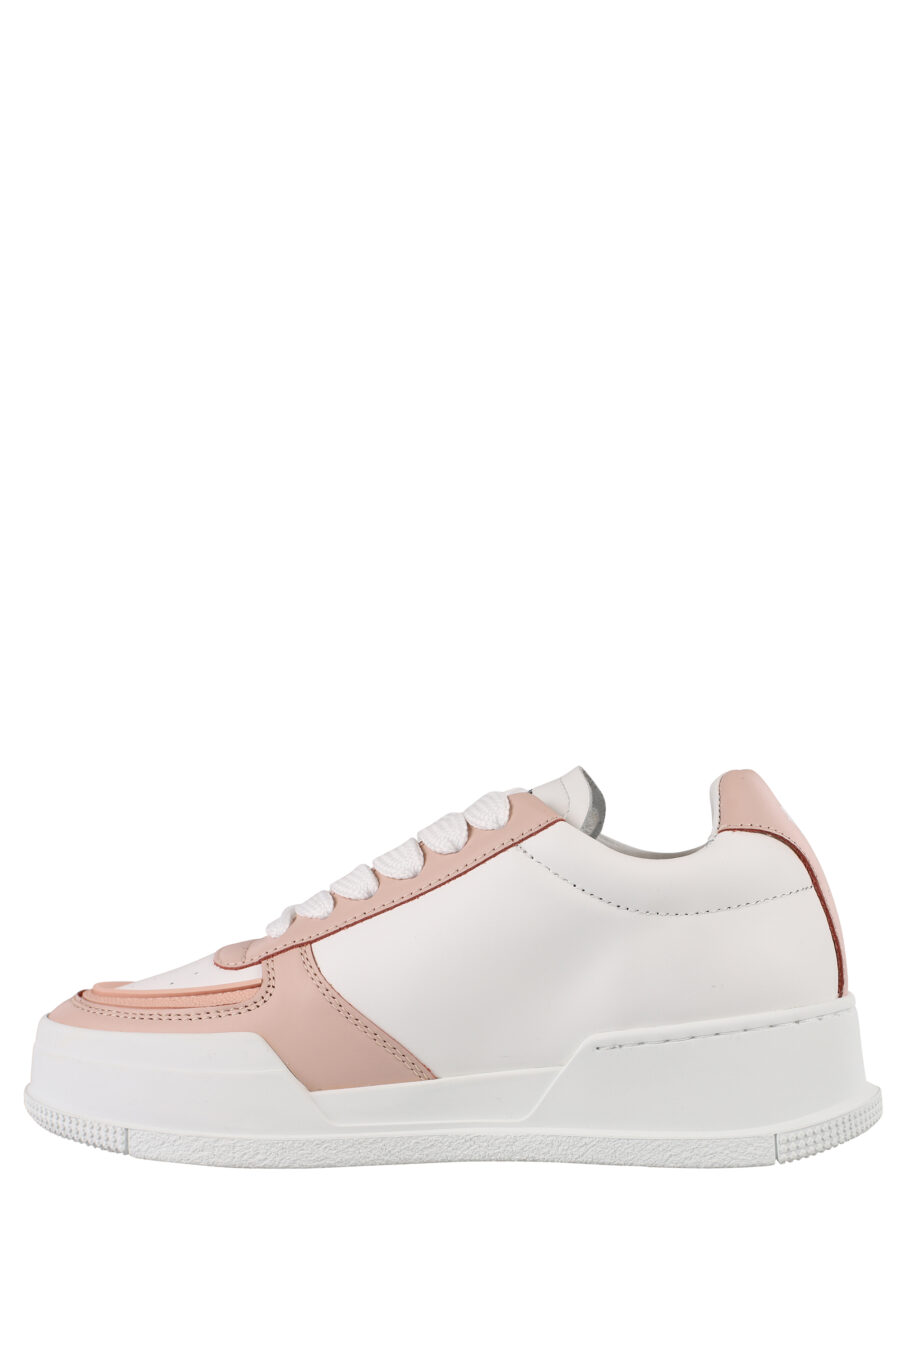 White platform trainers with pink detail - IMG 1177